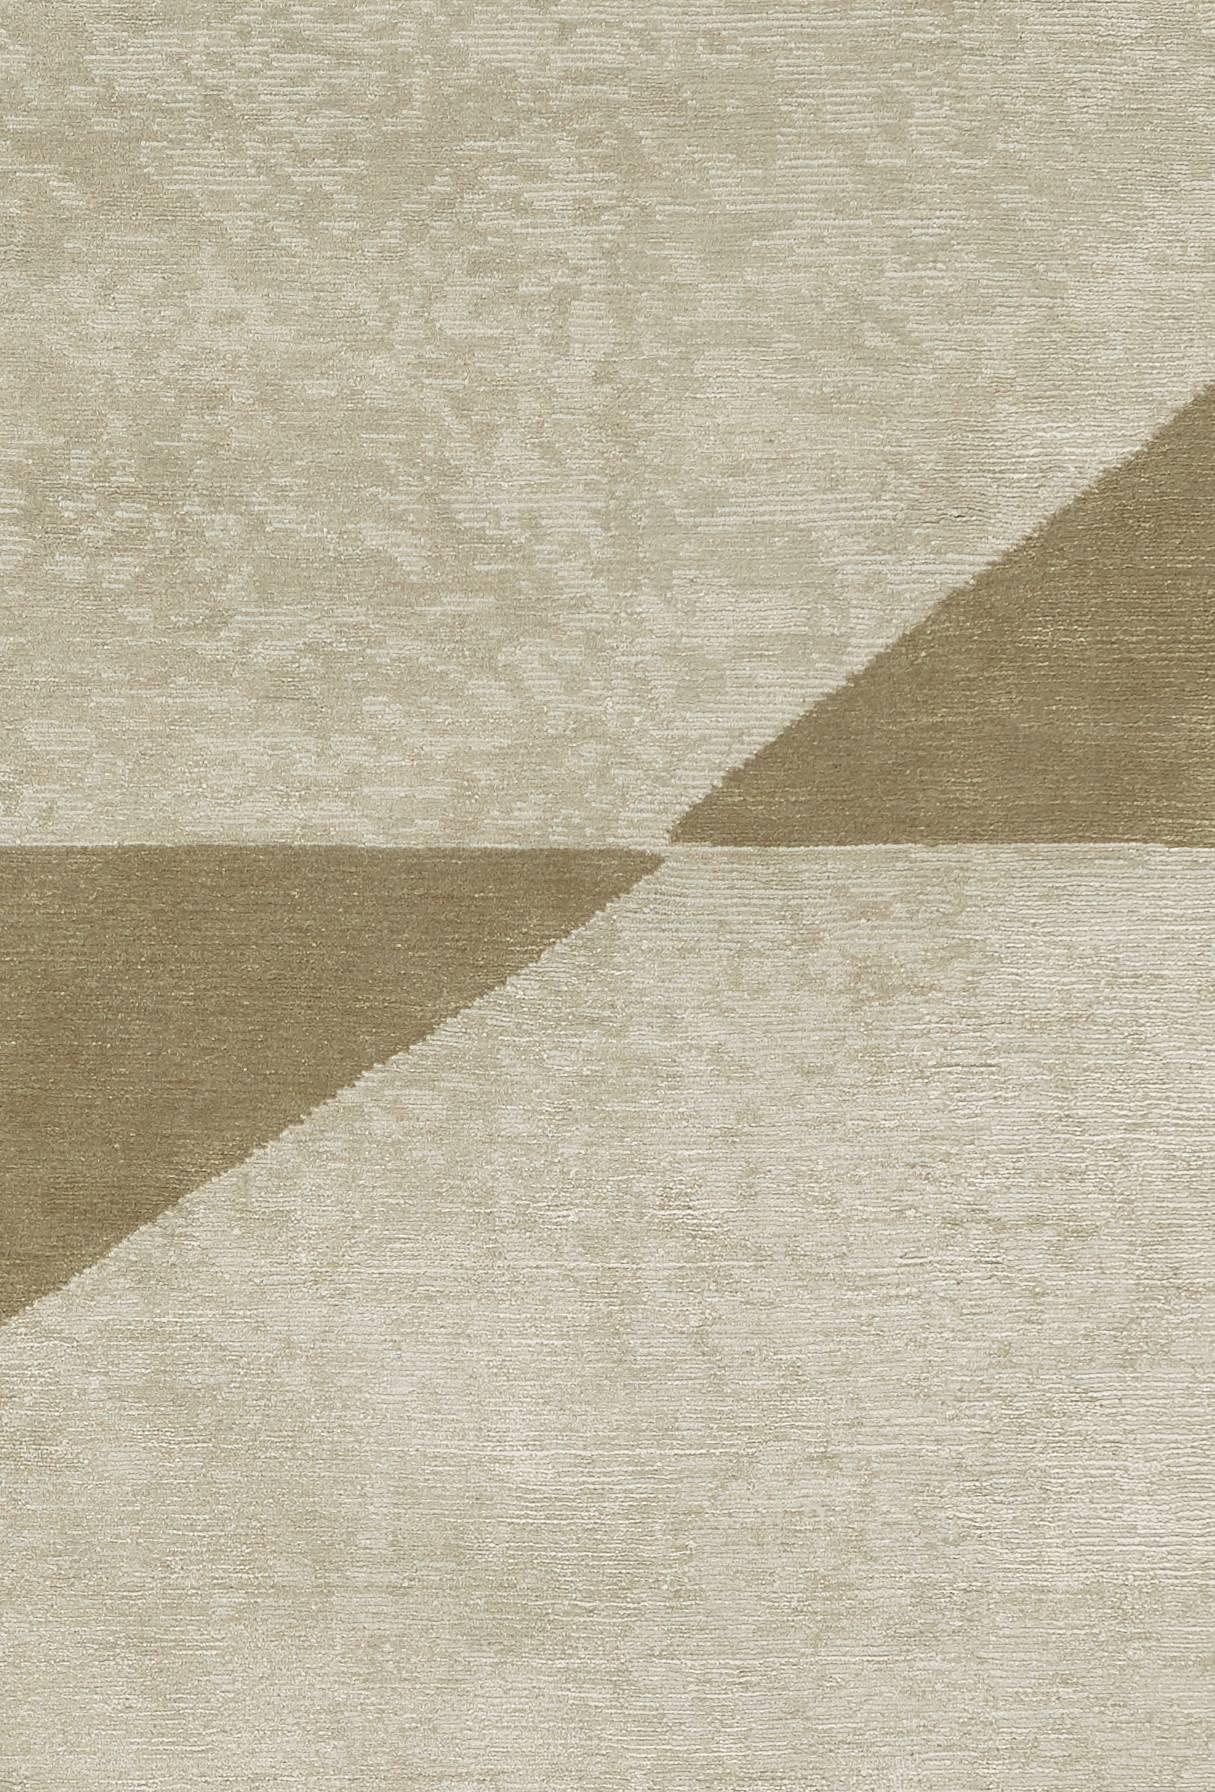 Luxurious Komo rug is made of silk and wool (65-35%) and it has a varying loop and cut texture.
The colors are light grey and brass (greenish-beige).
Low pile (5-6 mm). Quality: 100 knots by square inch.
Hand-knotted in Nepal.

 